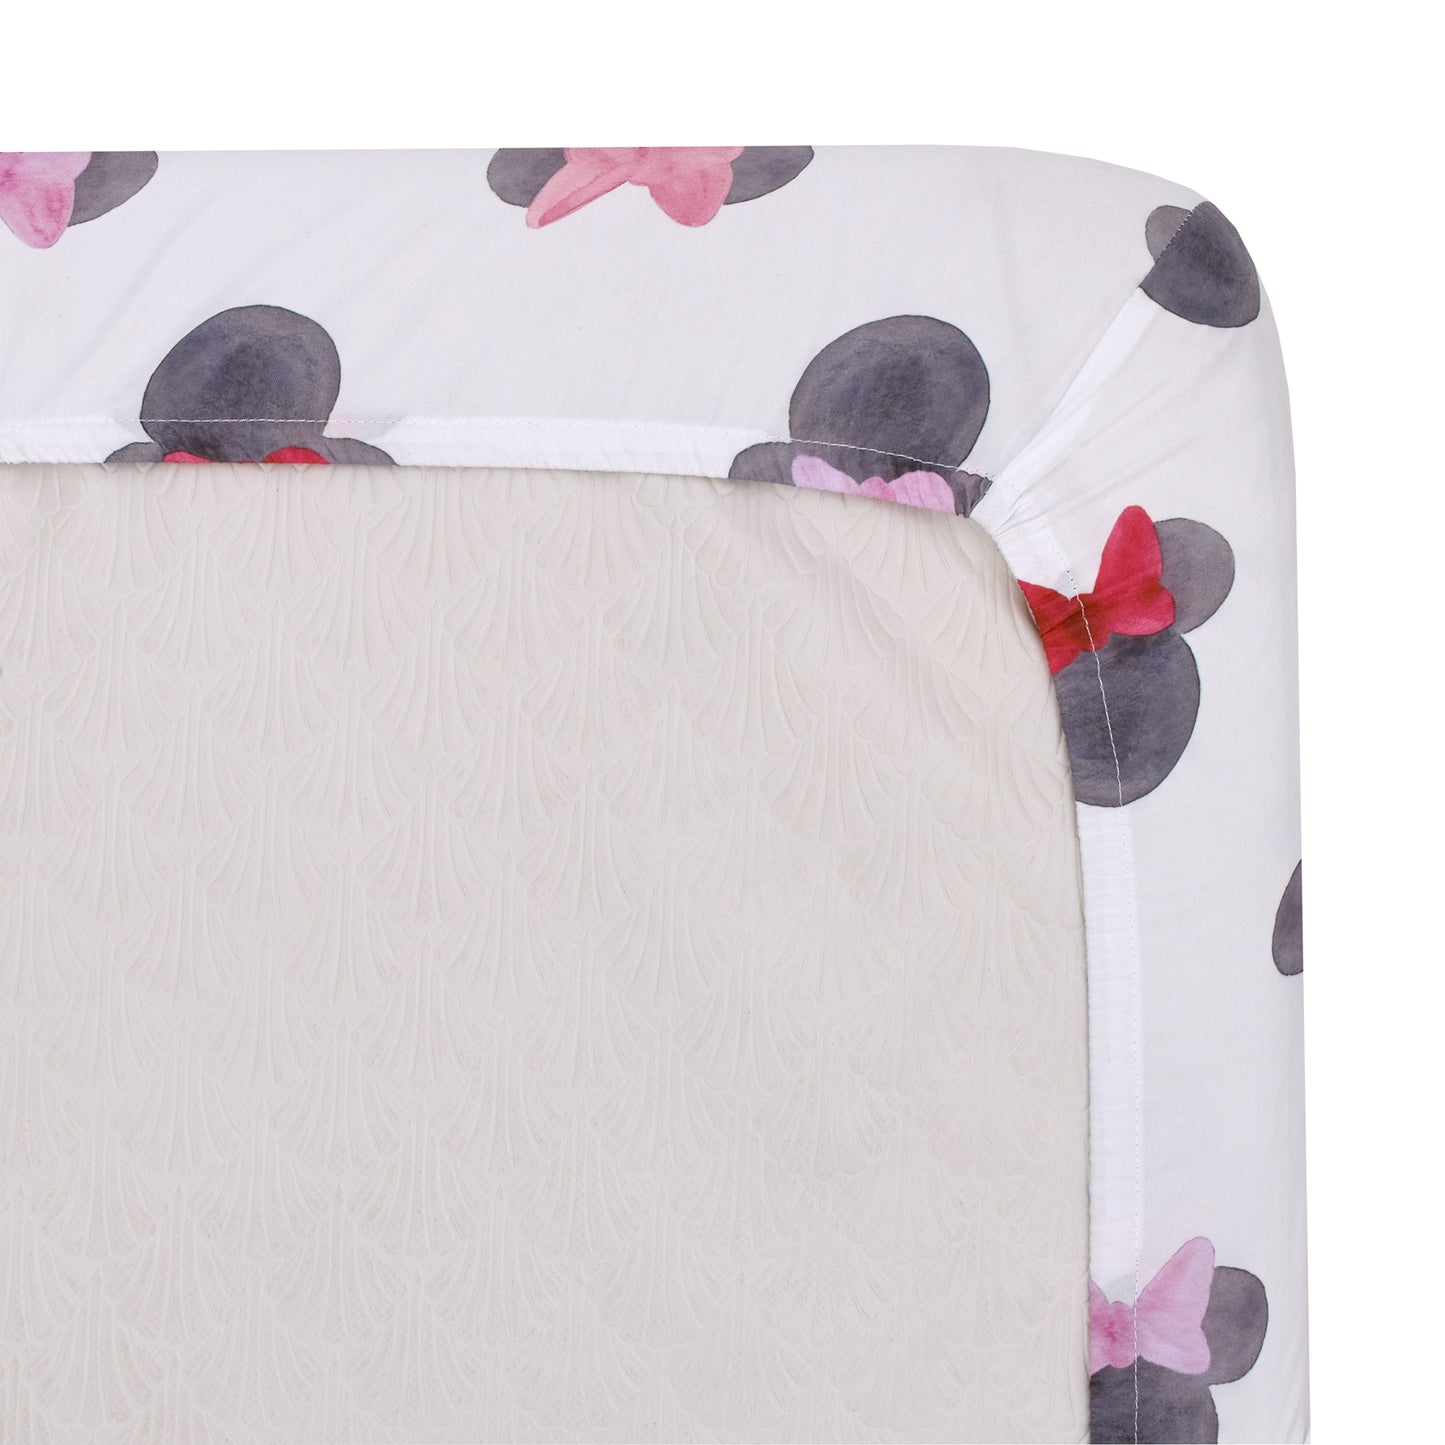 Disney Minnie Mouse - Black, Red and Pink Watercolor Minnie Ears Nursery Fitted Crib Sheet